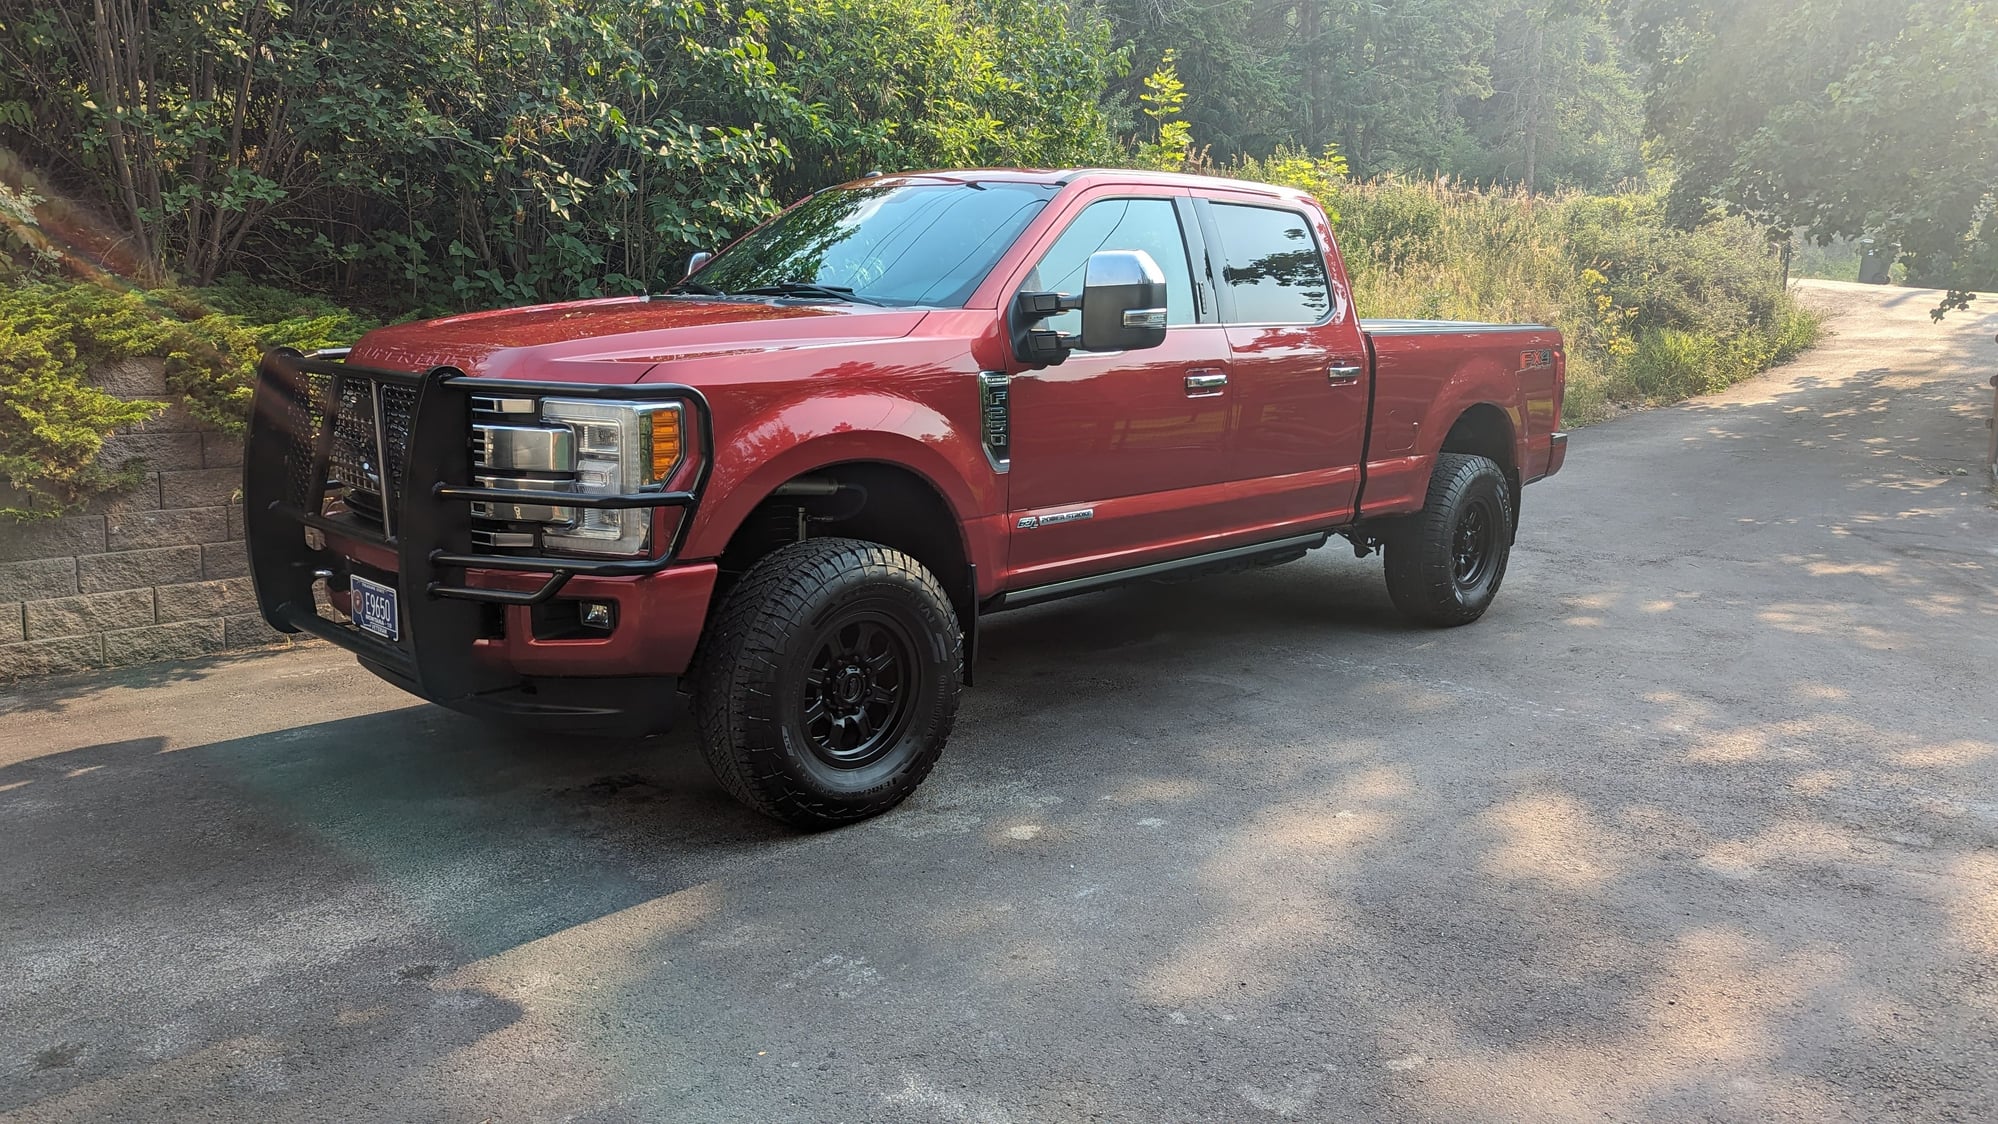 2017+ Installed Aftermarket Parts Thread - Ford Truck Enthusiasts Forums